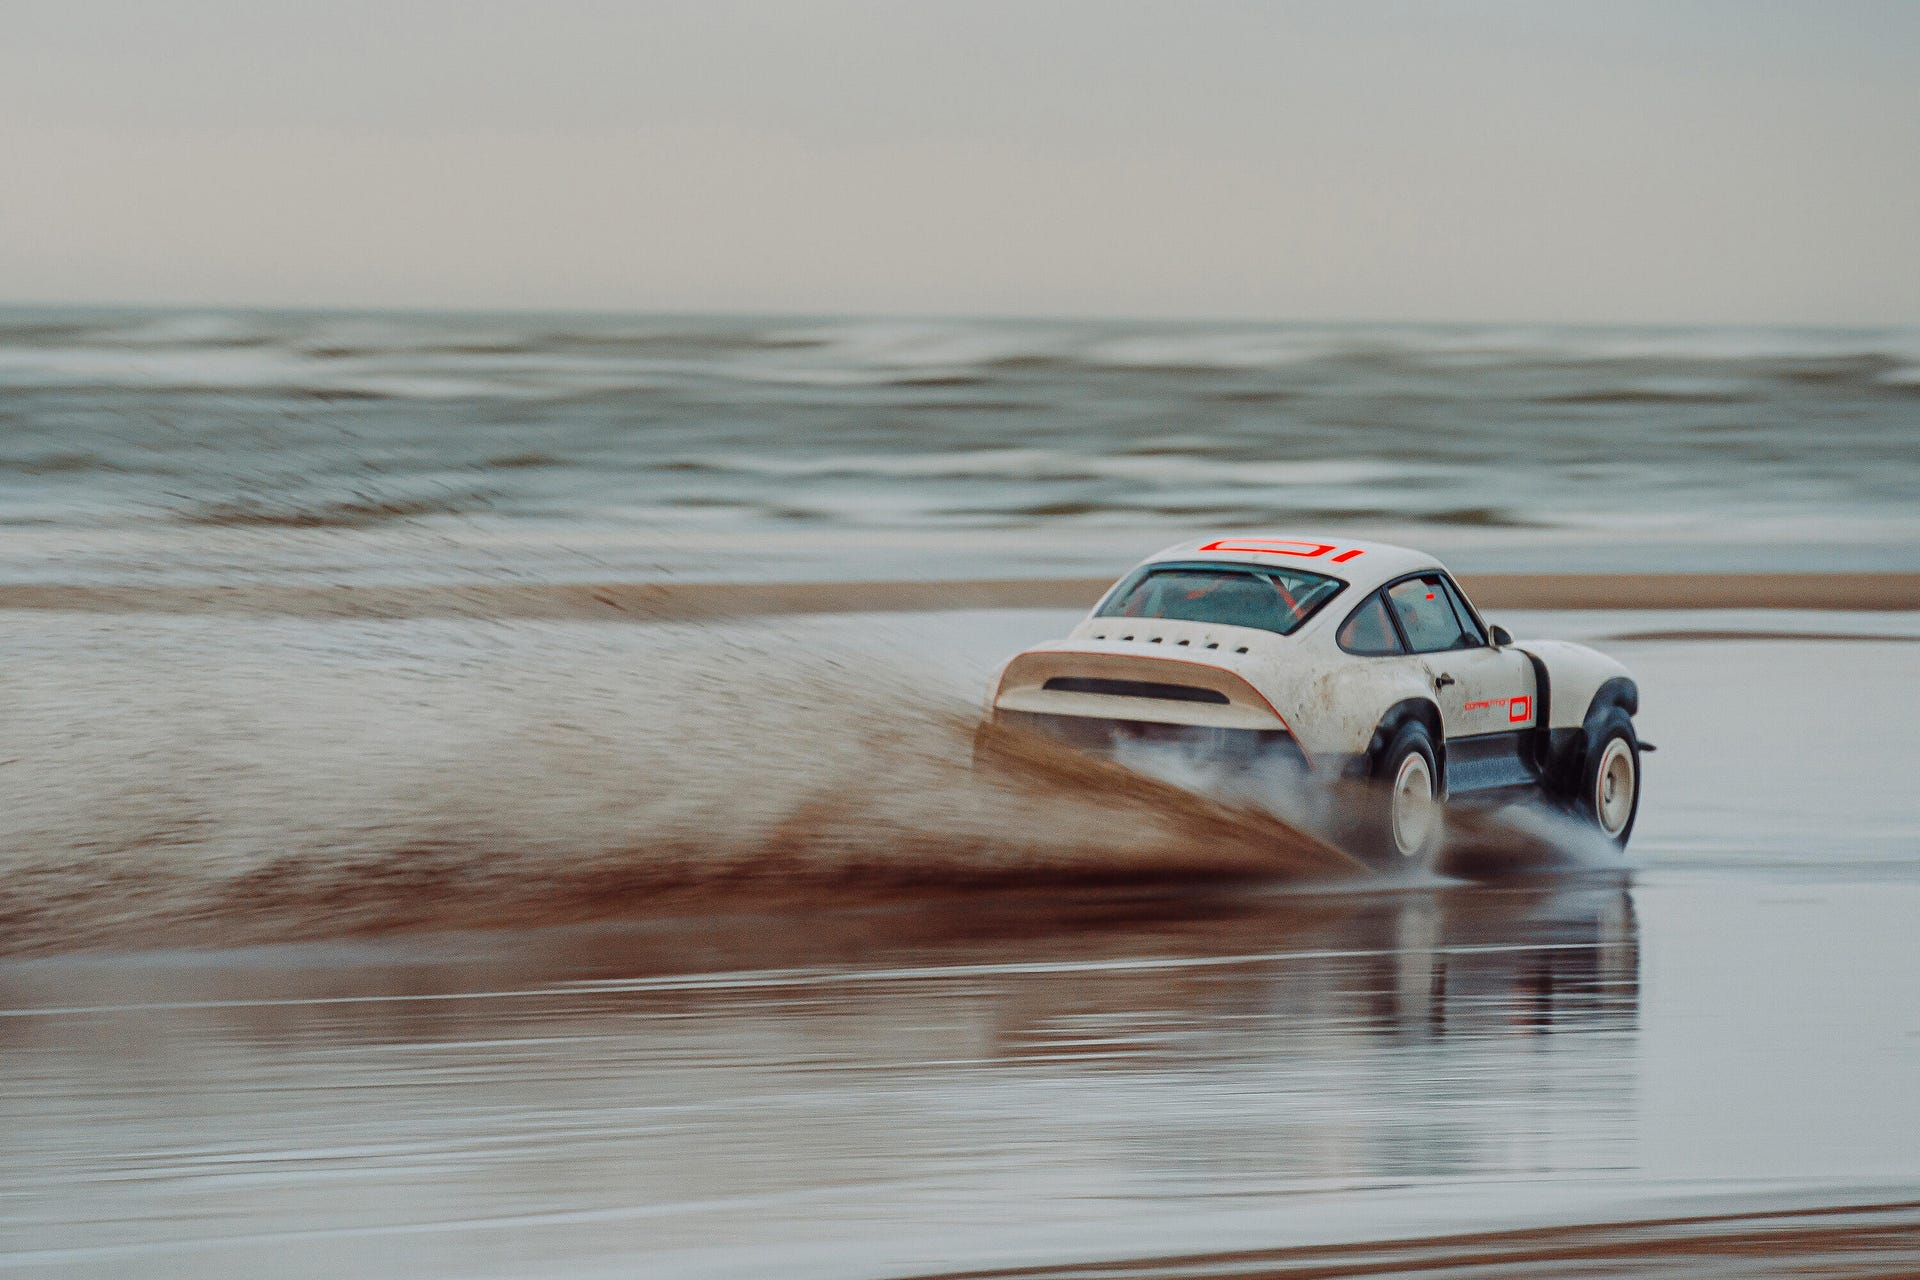 1990 Porsche 911 All-Terrain Competition Study reimagined by Singer